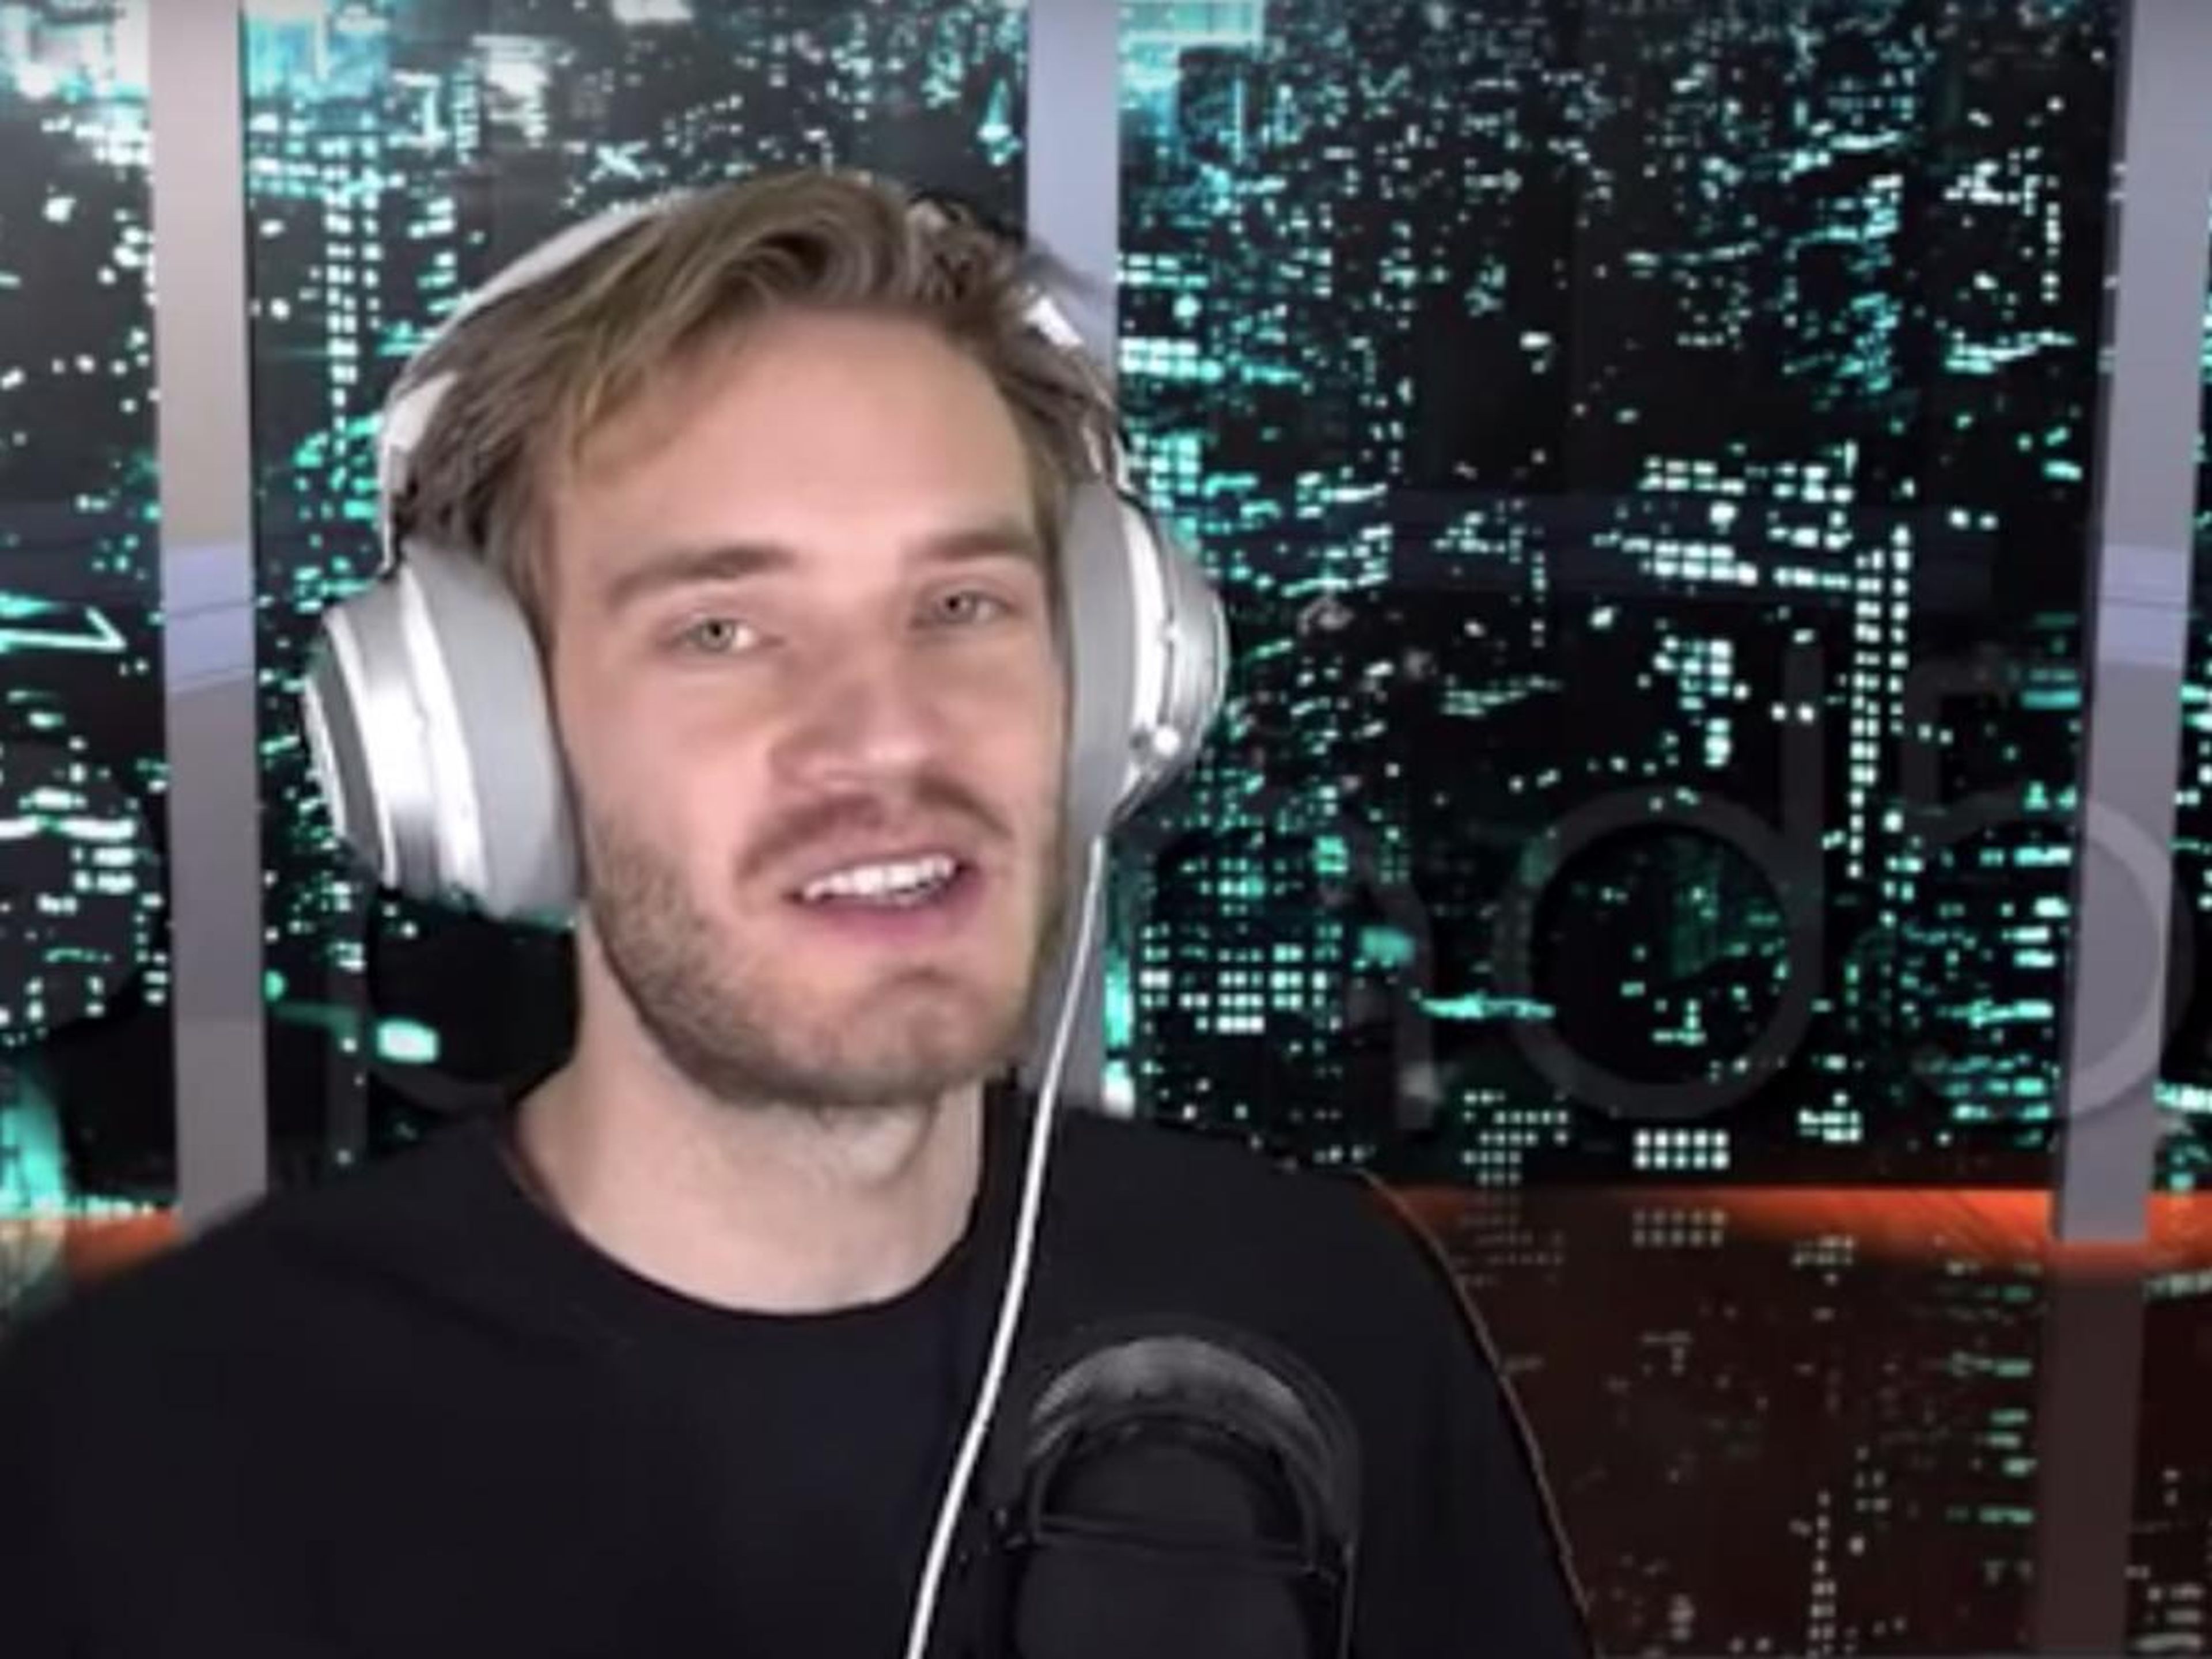 In the early days, PewDiePie's channel consisted mostly of play-by-plays of video games — dubbed the "Let's Play" genre — along with color commentary. He found that his videos with horror games were more popular, and people were